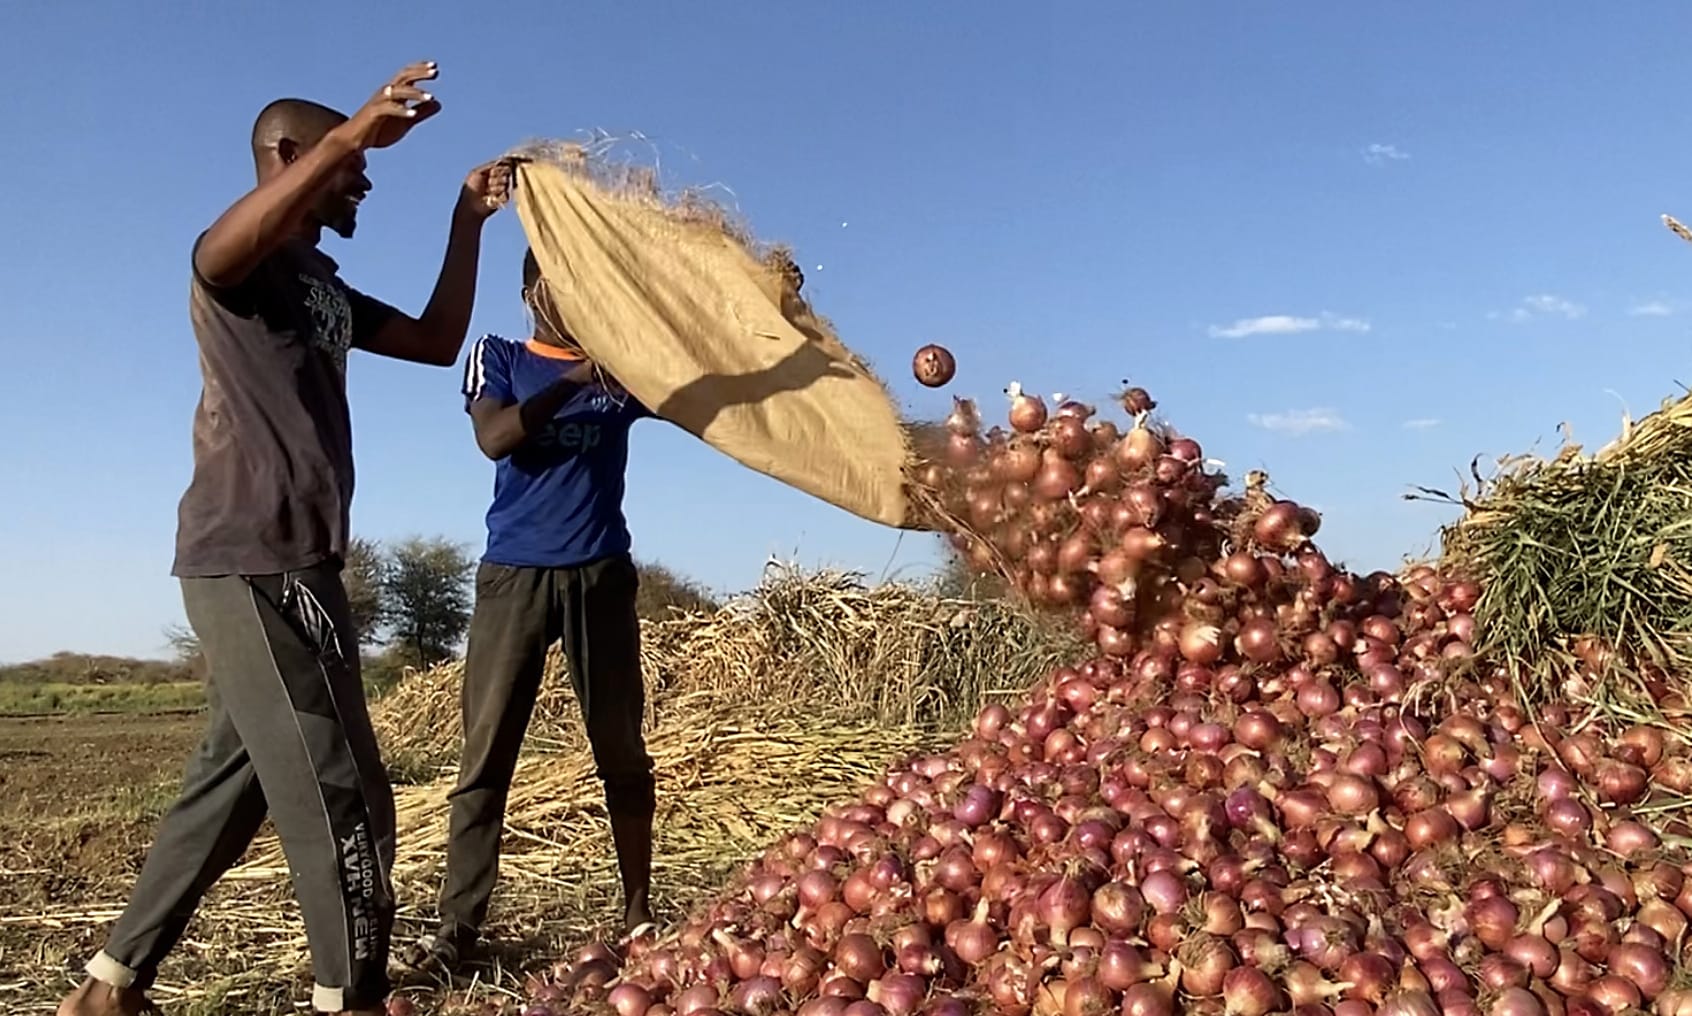 AL-JAZIRAH, Sudan: Sudanese men harvest onions in the region of Jazira, south of Khartoum. As fighting in Khartoum shows no signs of abating, small business owners have been left at a loss with no prospect of making up weeks of unmitigated downturn. – AFP